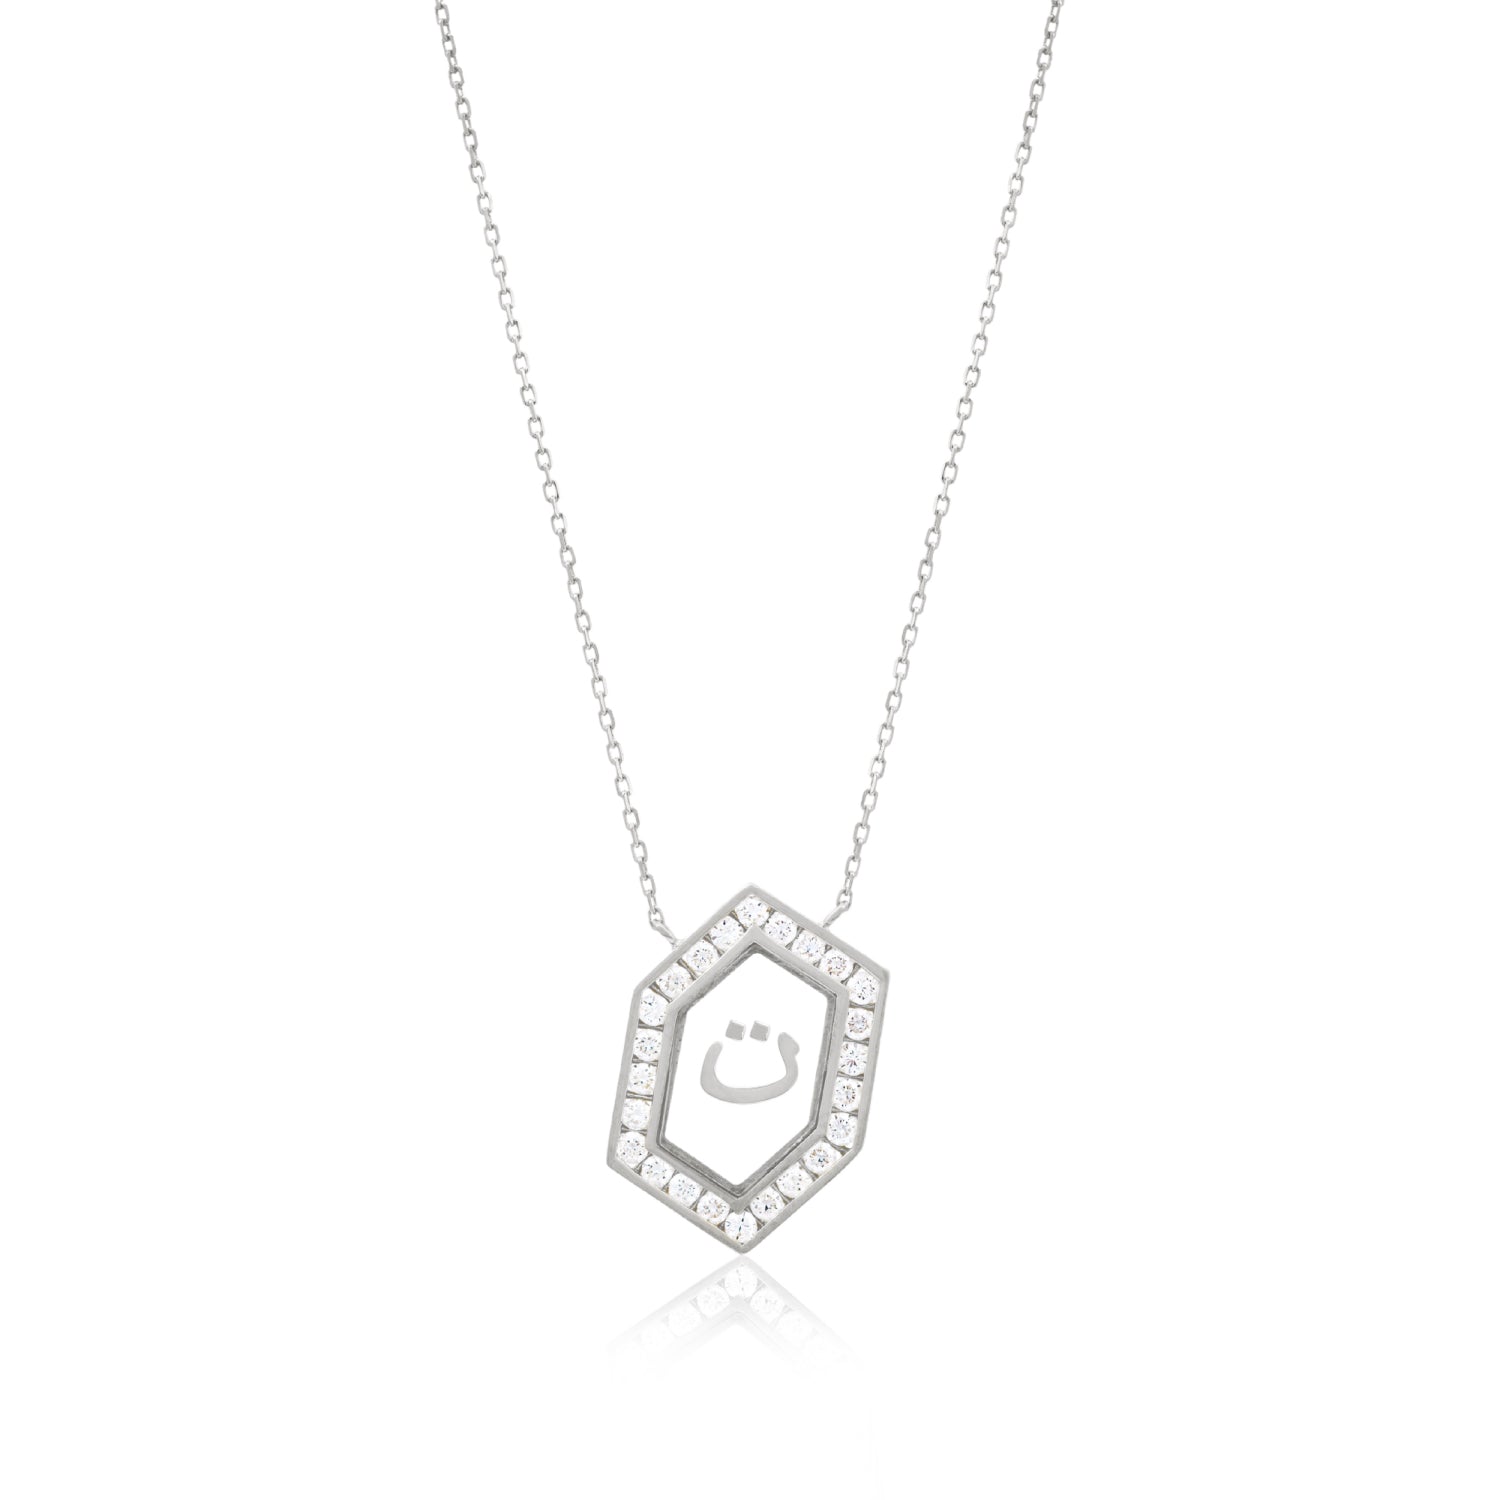 Qamoos 1.0 Letter ت Diamond Necklace in White Gold